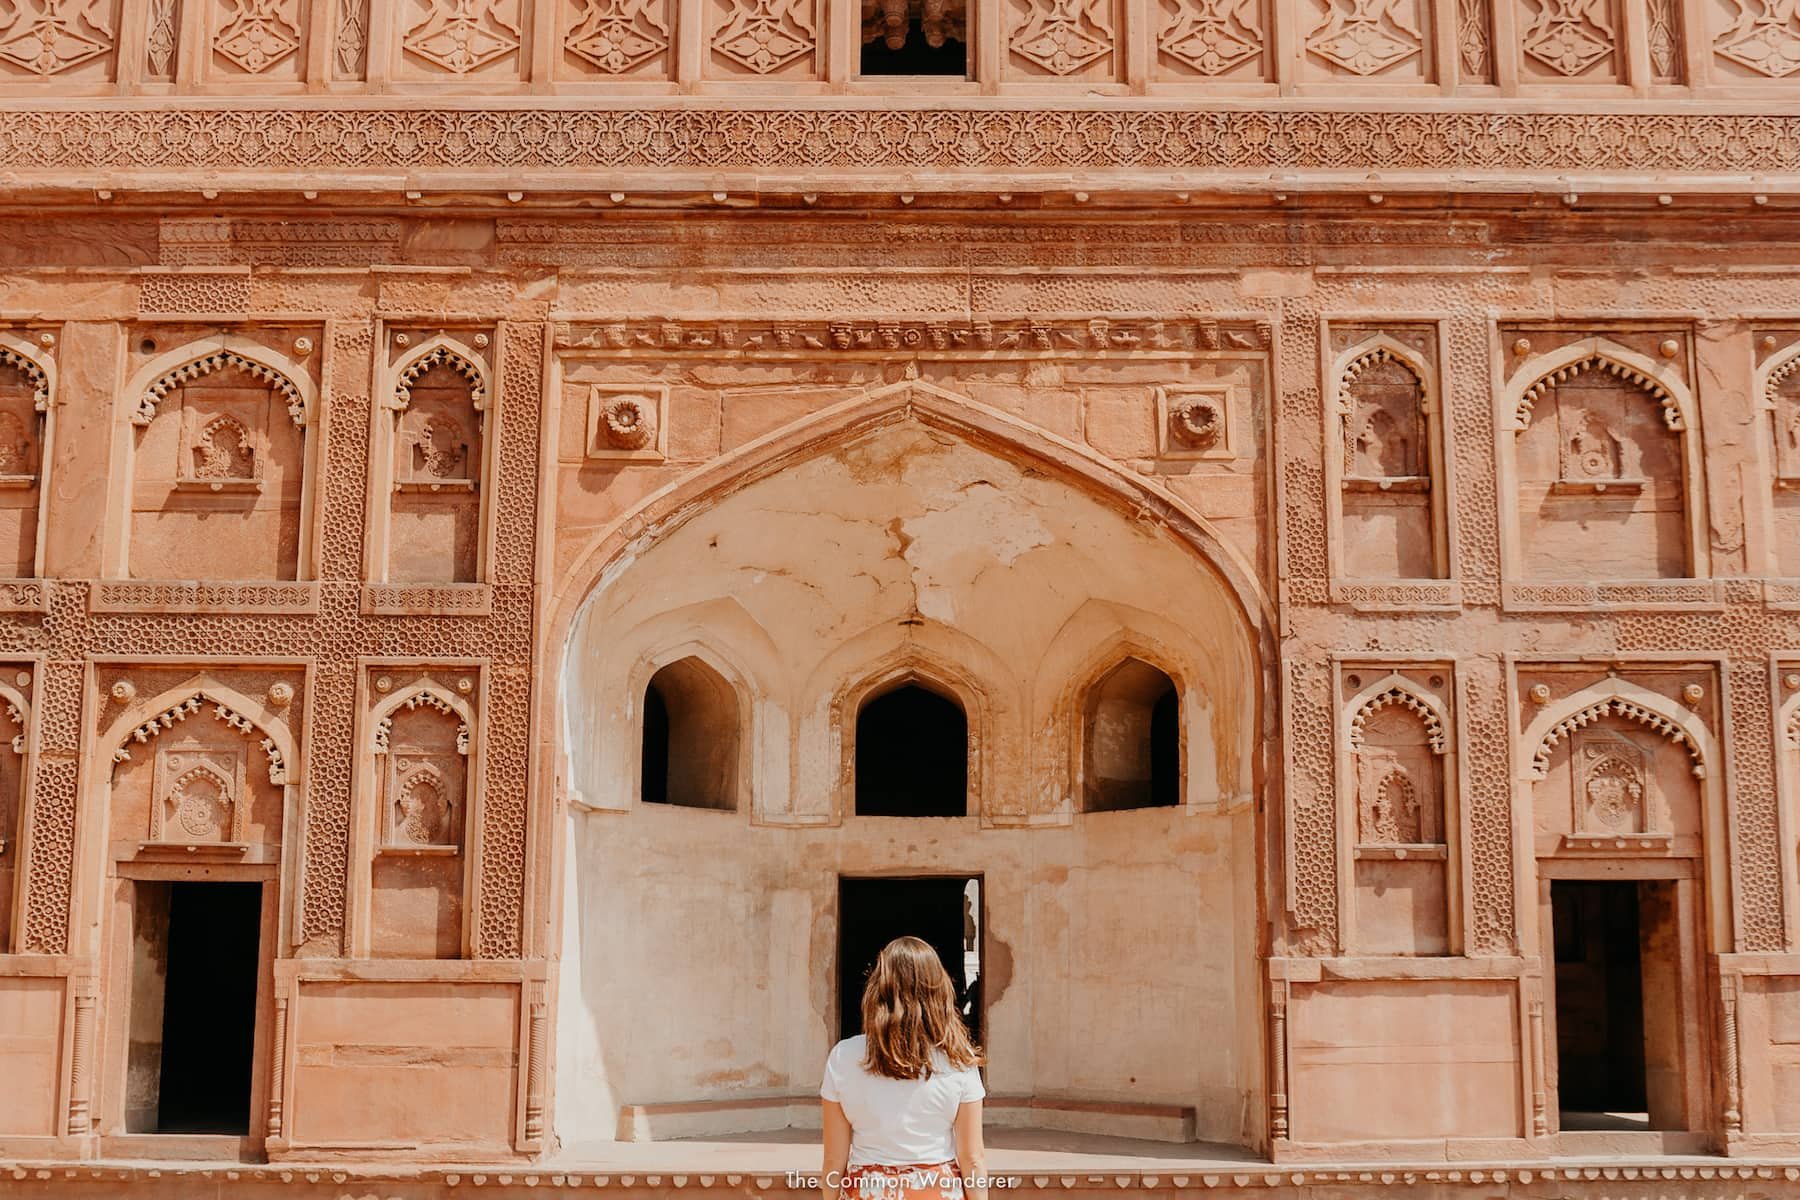 A guide to Agra Fort | The Common Wanderer